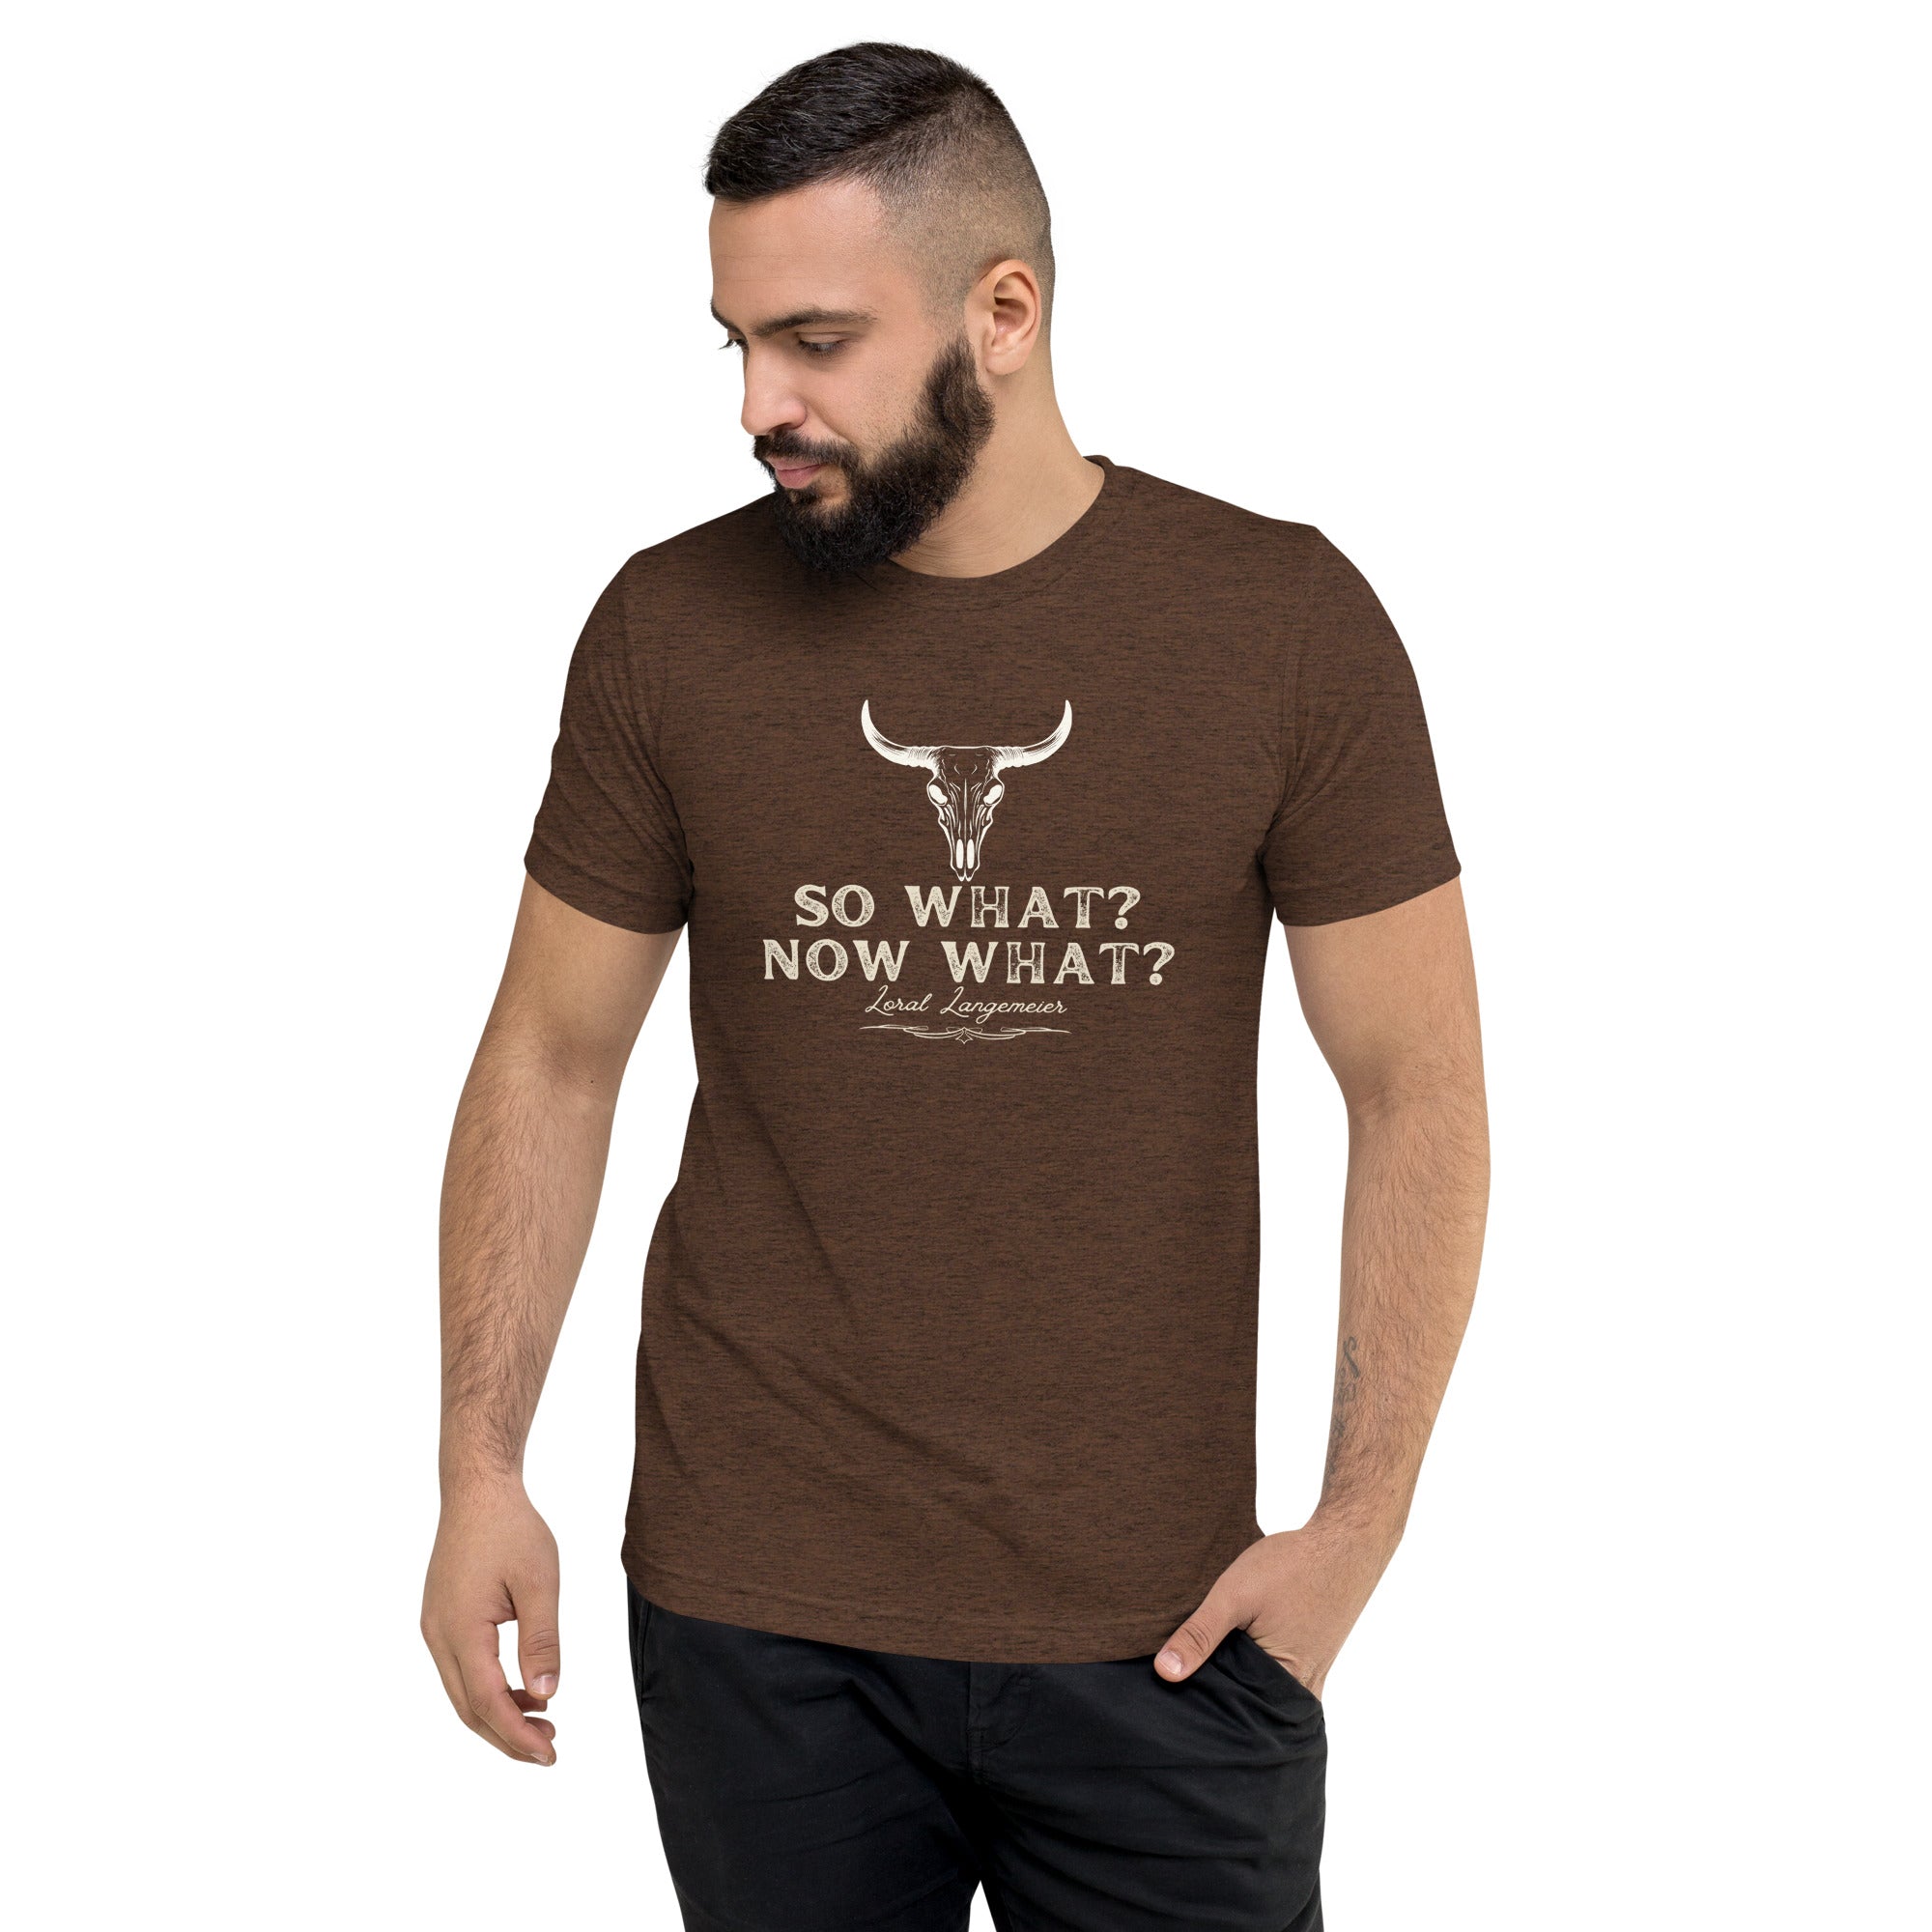 So What? Now What? Short sleeve t-shirt